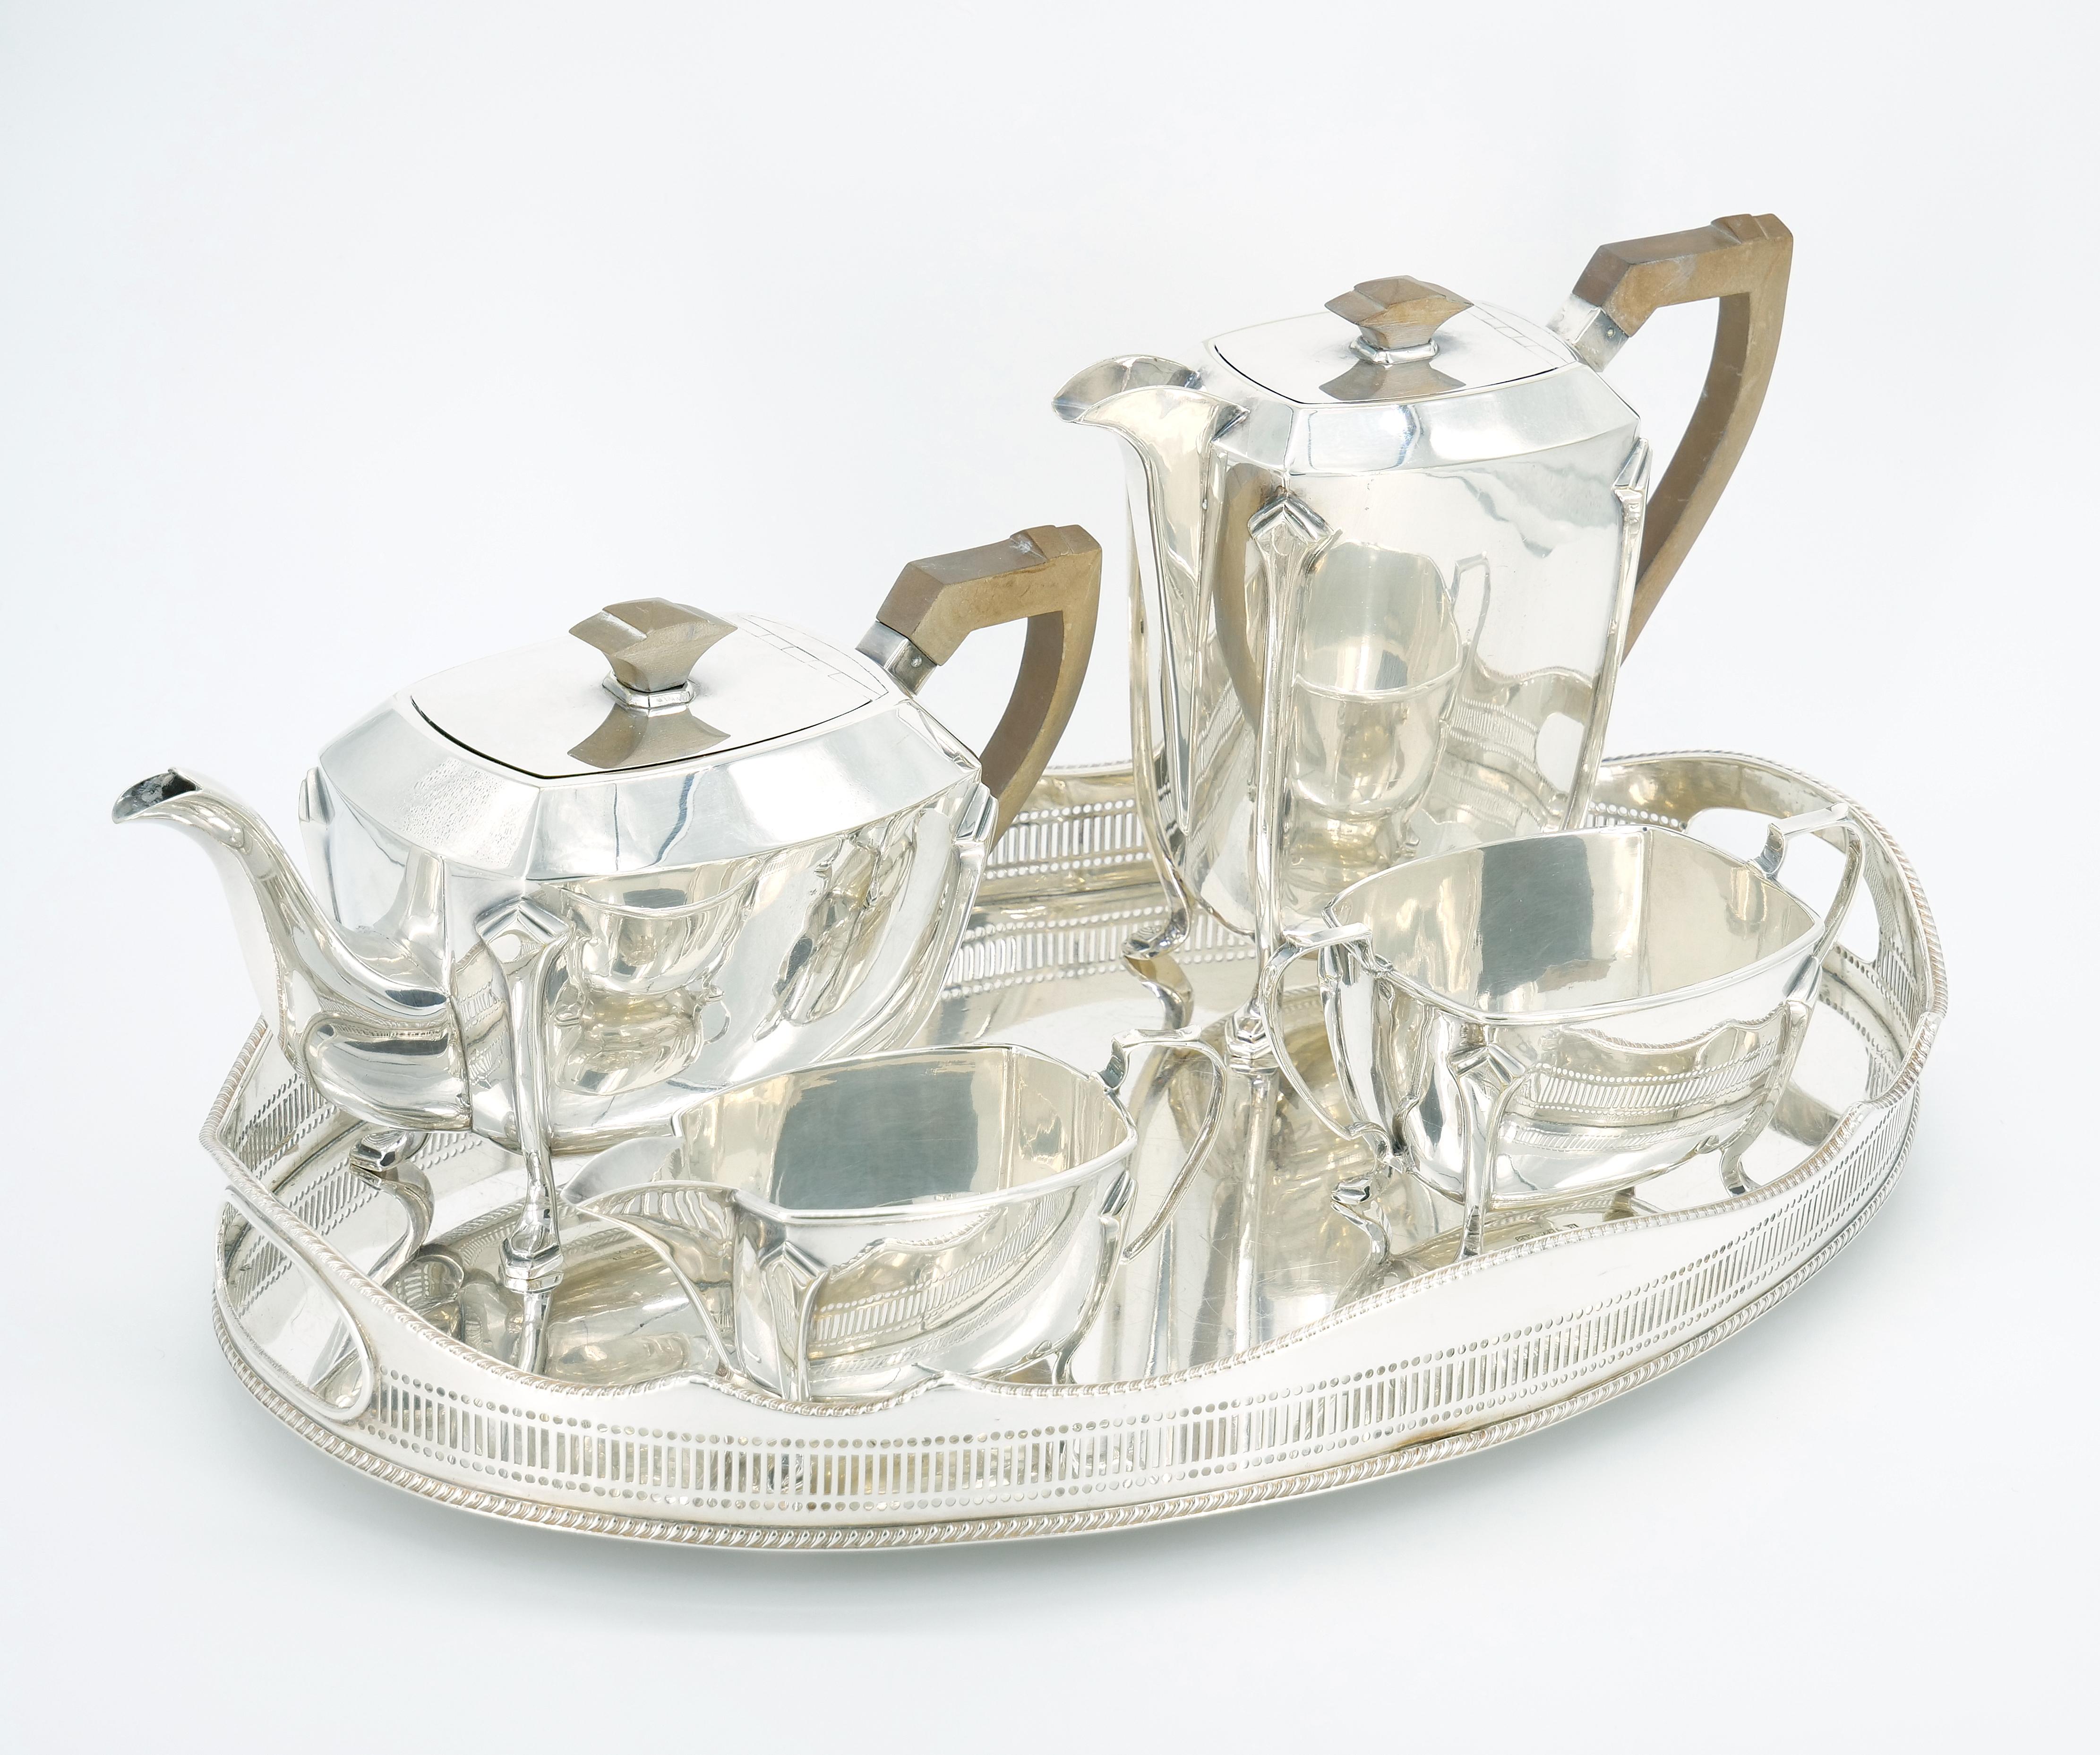 Transport yourself to the elegance of the Early 20th Century with our English Silver-Plated Bone Handle Four-Piece Tea and Coffee Service, accompanied by a sophisticated serving tray. This exquisite set seamlessly combines Art Deco style with clean